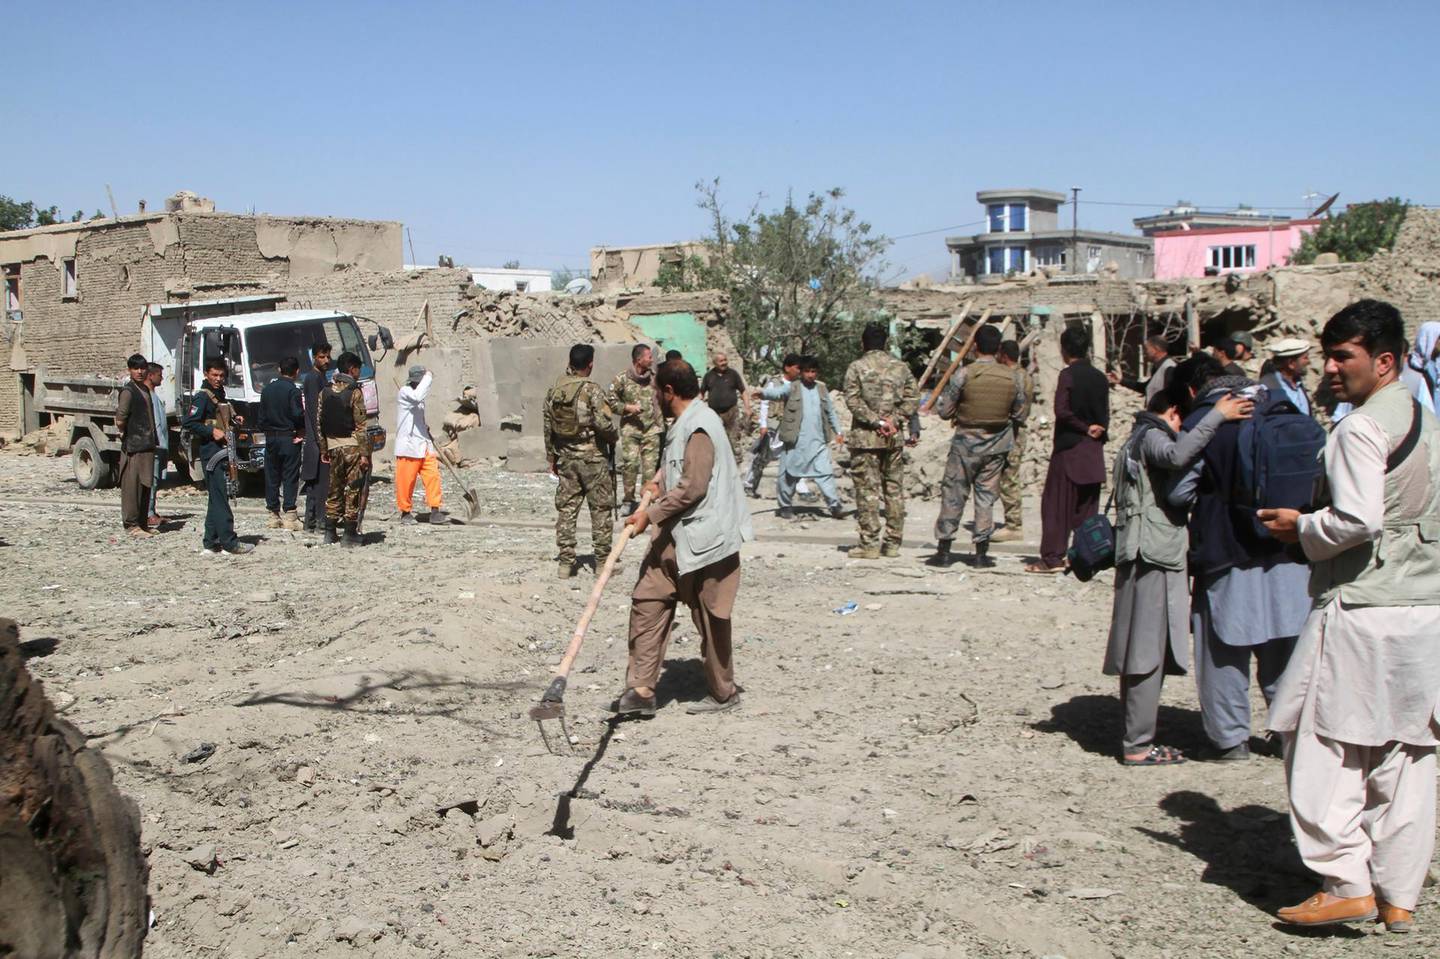 Afghan security forces inspect the site of a car bomb attack in Ghazni province, central Afghanistan, Sunday, July 7, 2019. Afghan officials say a car bomb in central Afghanistan has killed a few people and wounded dozens of people, many of them students attending a nearby school. (AP Photo/Rahmatullah Nikzad)